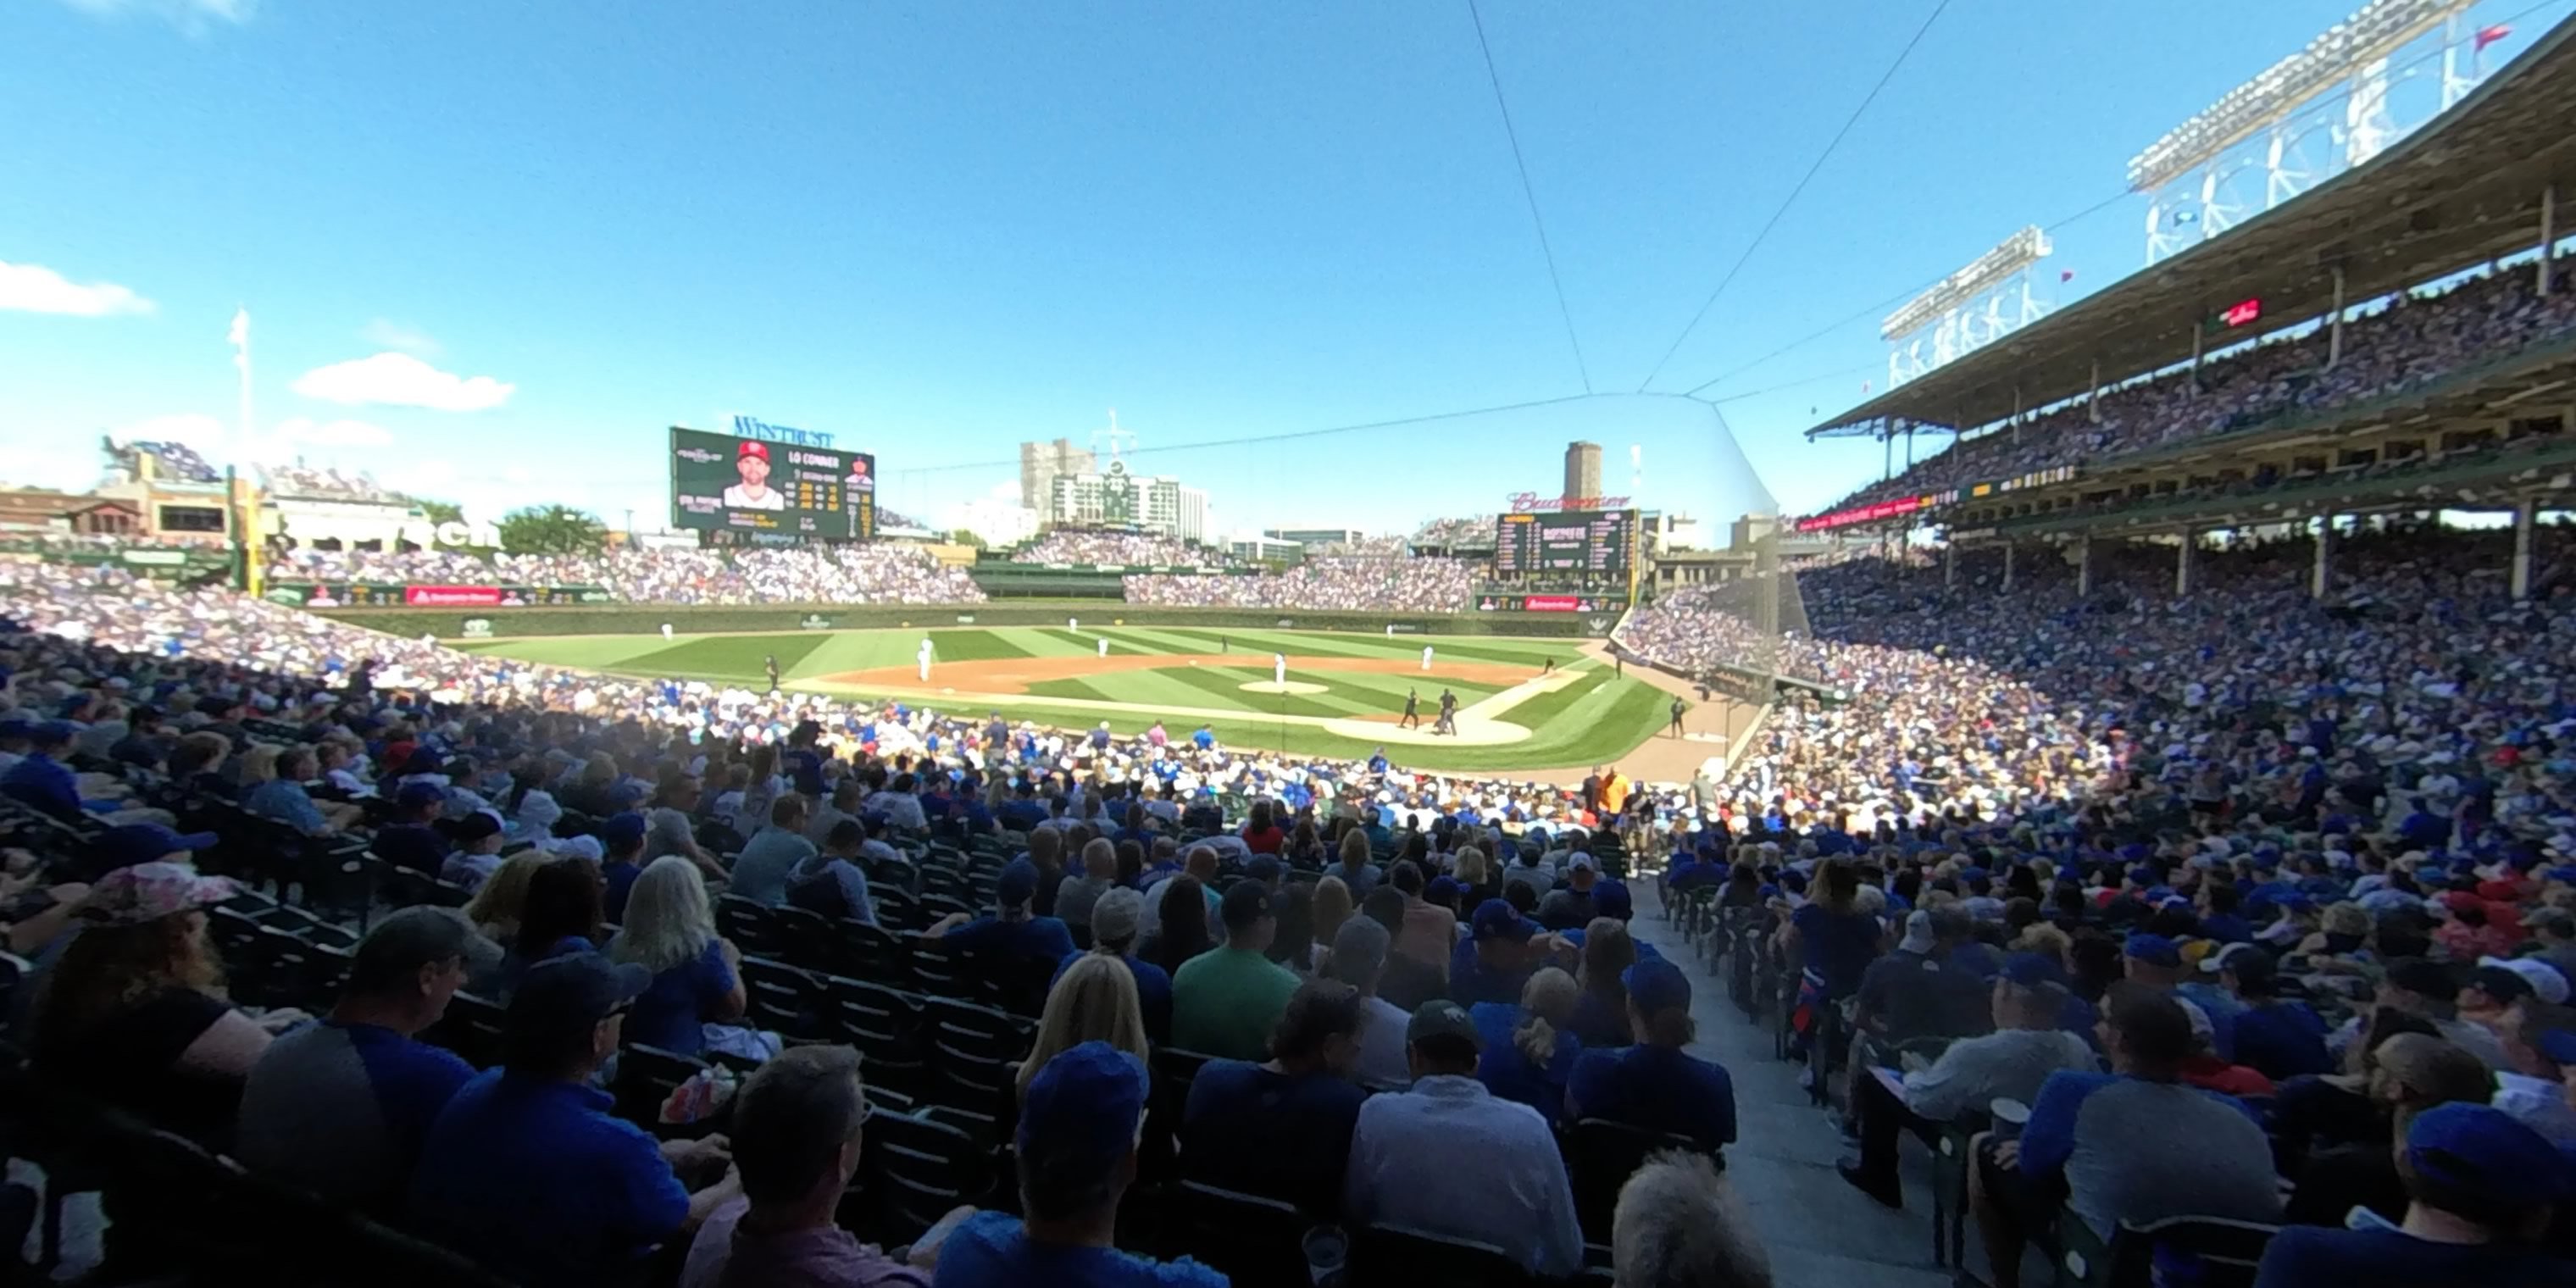 section 115 panoramic seat view  for baseball - wrigley field